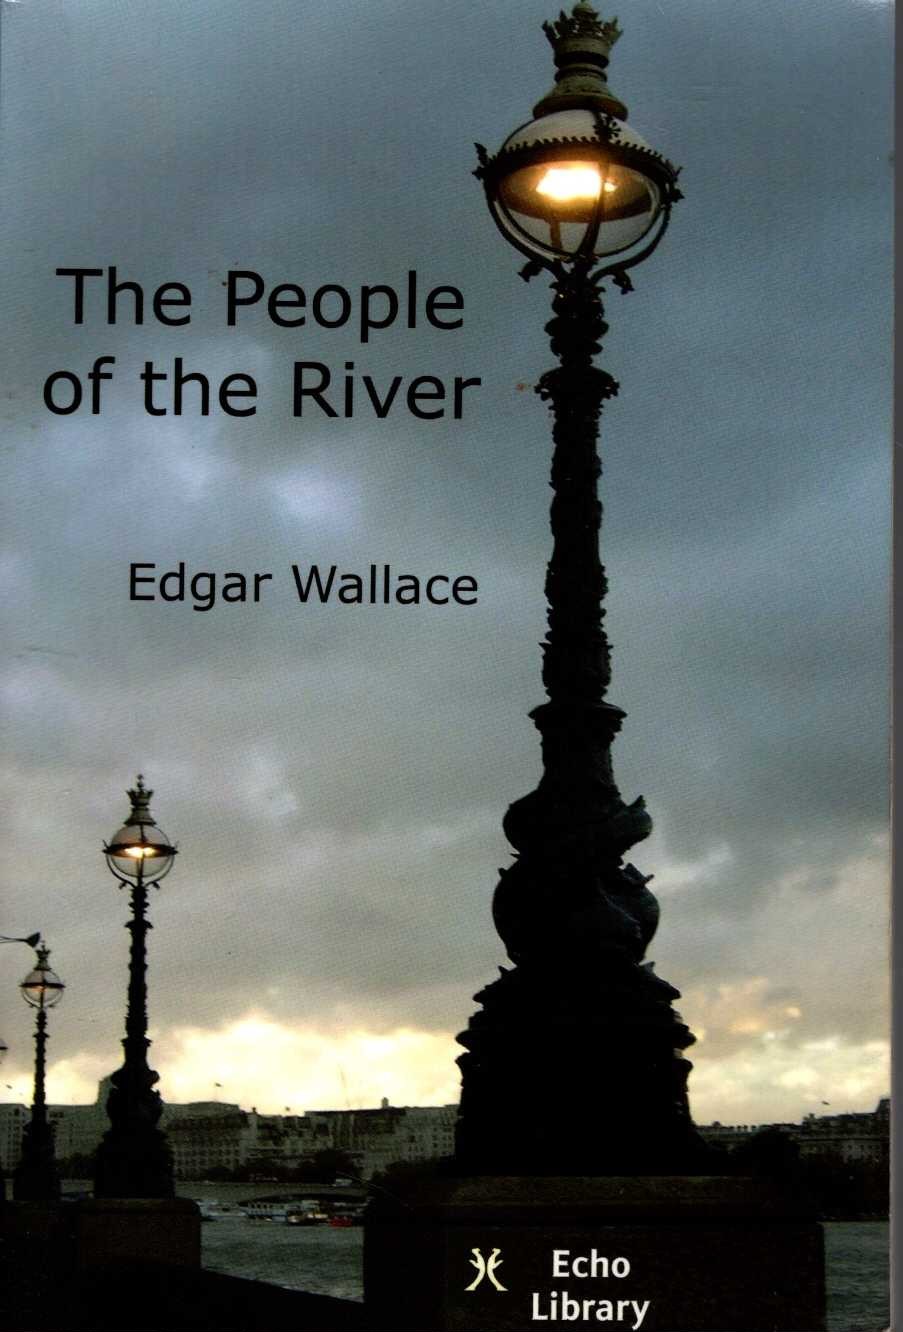 Edgar Wallace  THE PEOPLE OF THE RIVER front book cover image